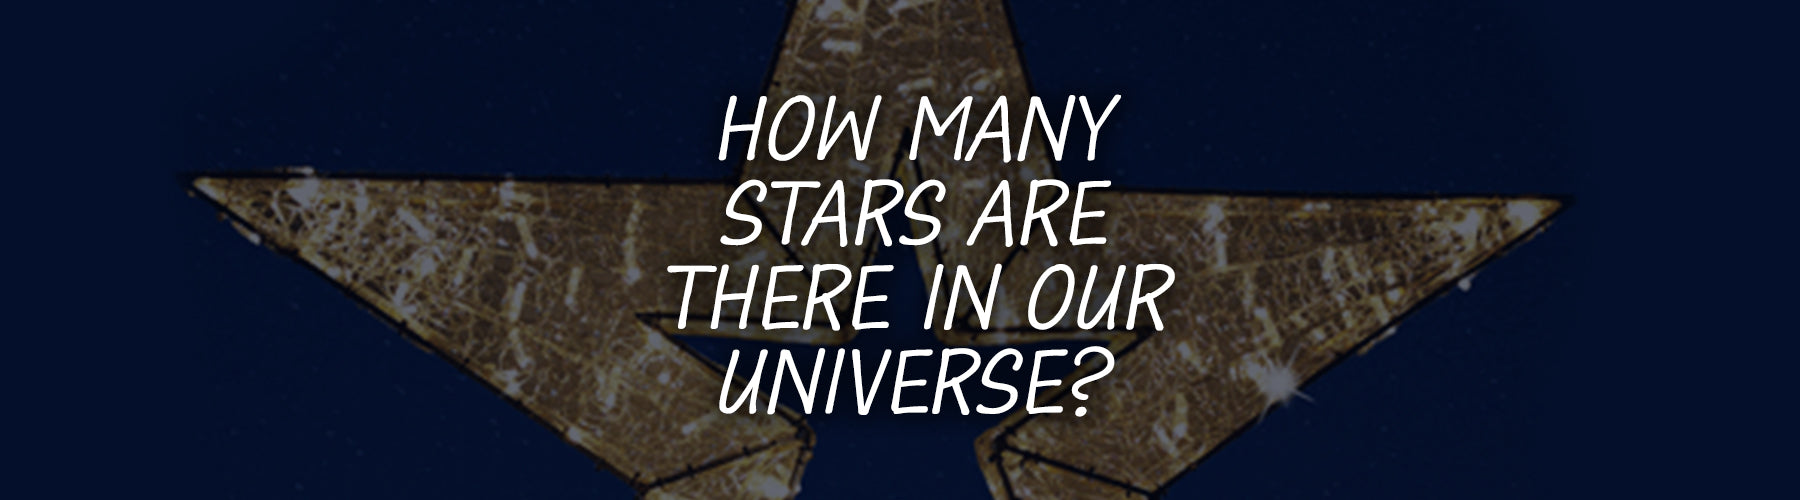 How Many Stars Are There in Our Universe?